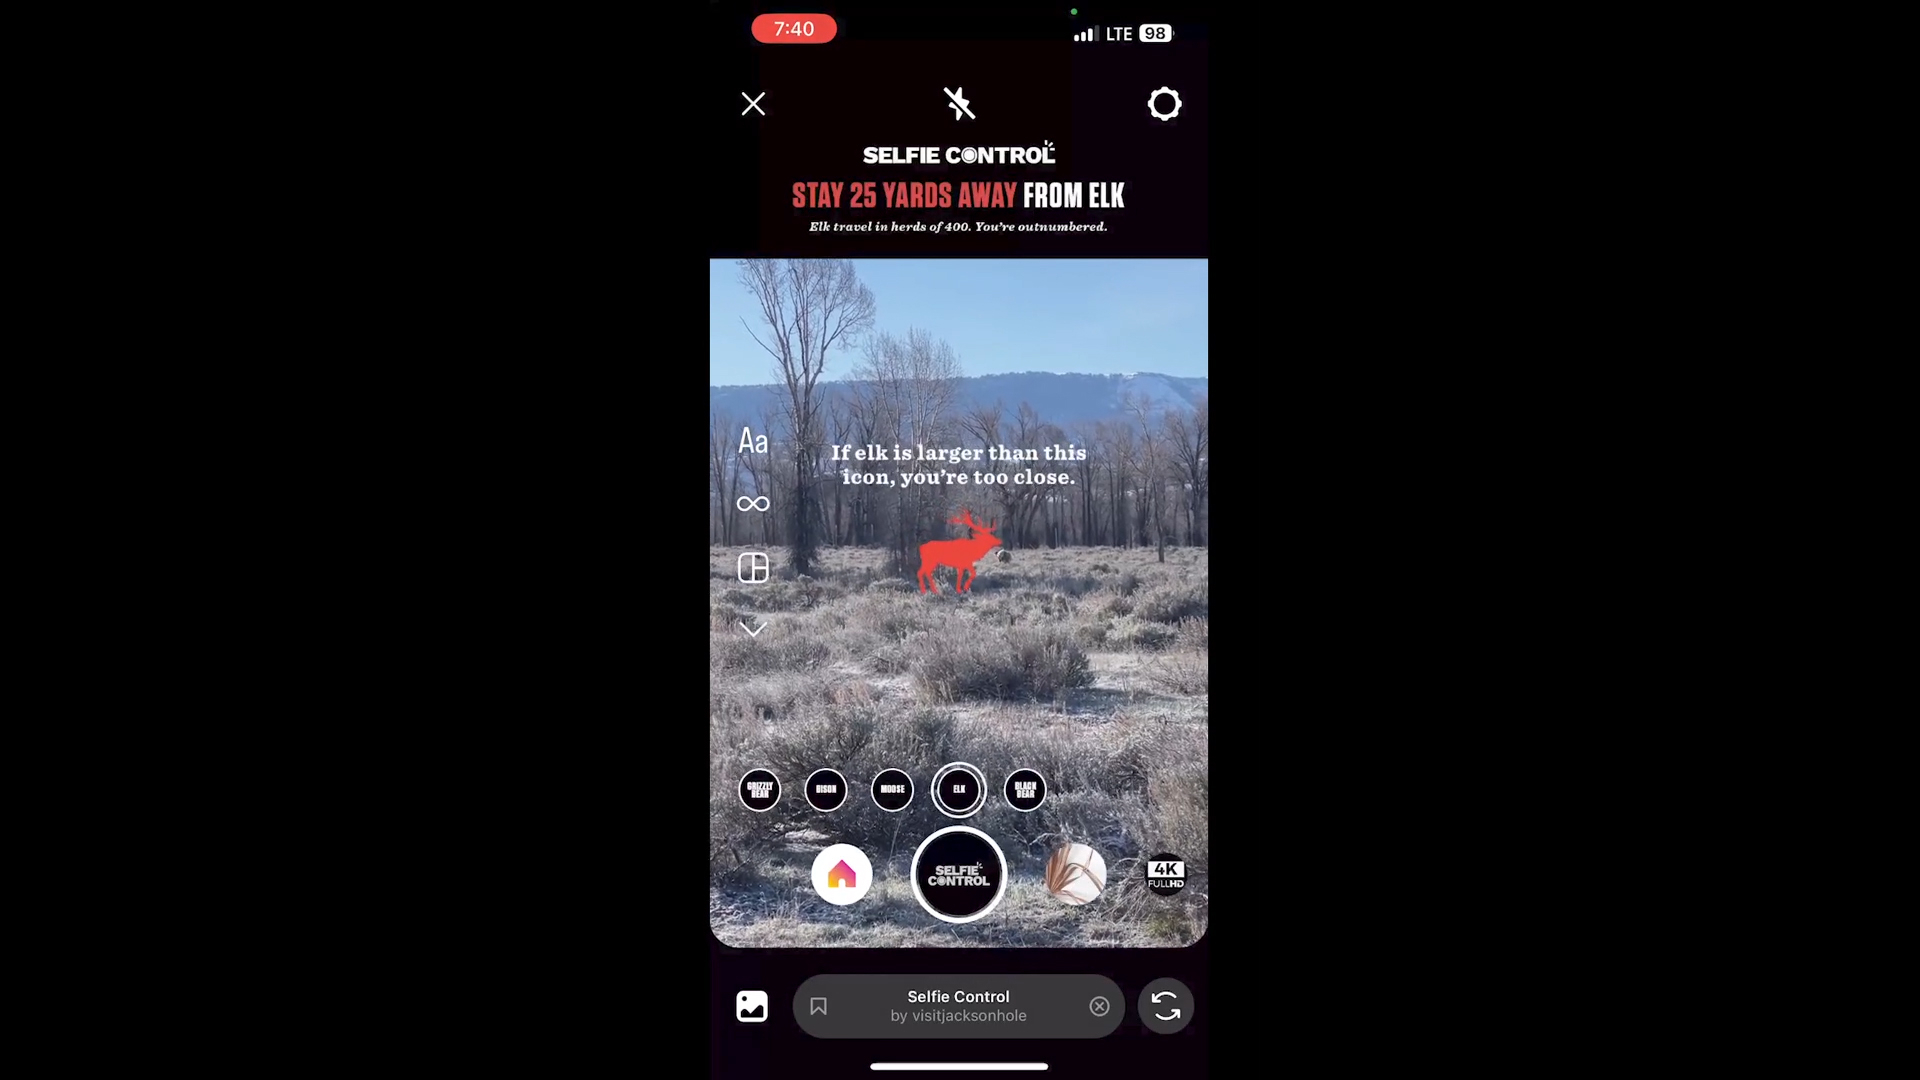 The Selfie Control filter serves as a reminder that viewing and taking photos of wildlife is allowed and acceptable, but staying the appropriate distance is more than a suggestion.